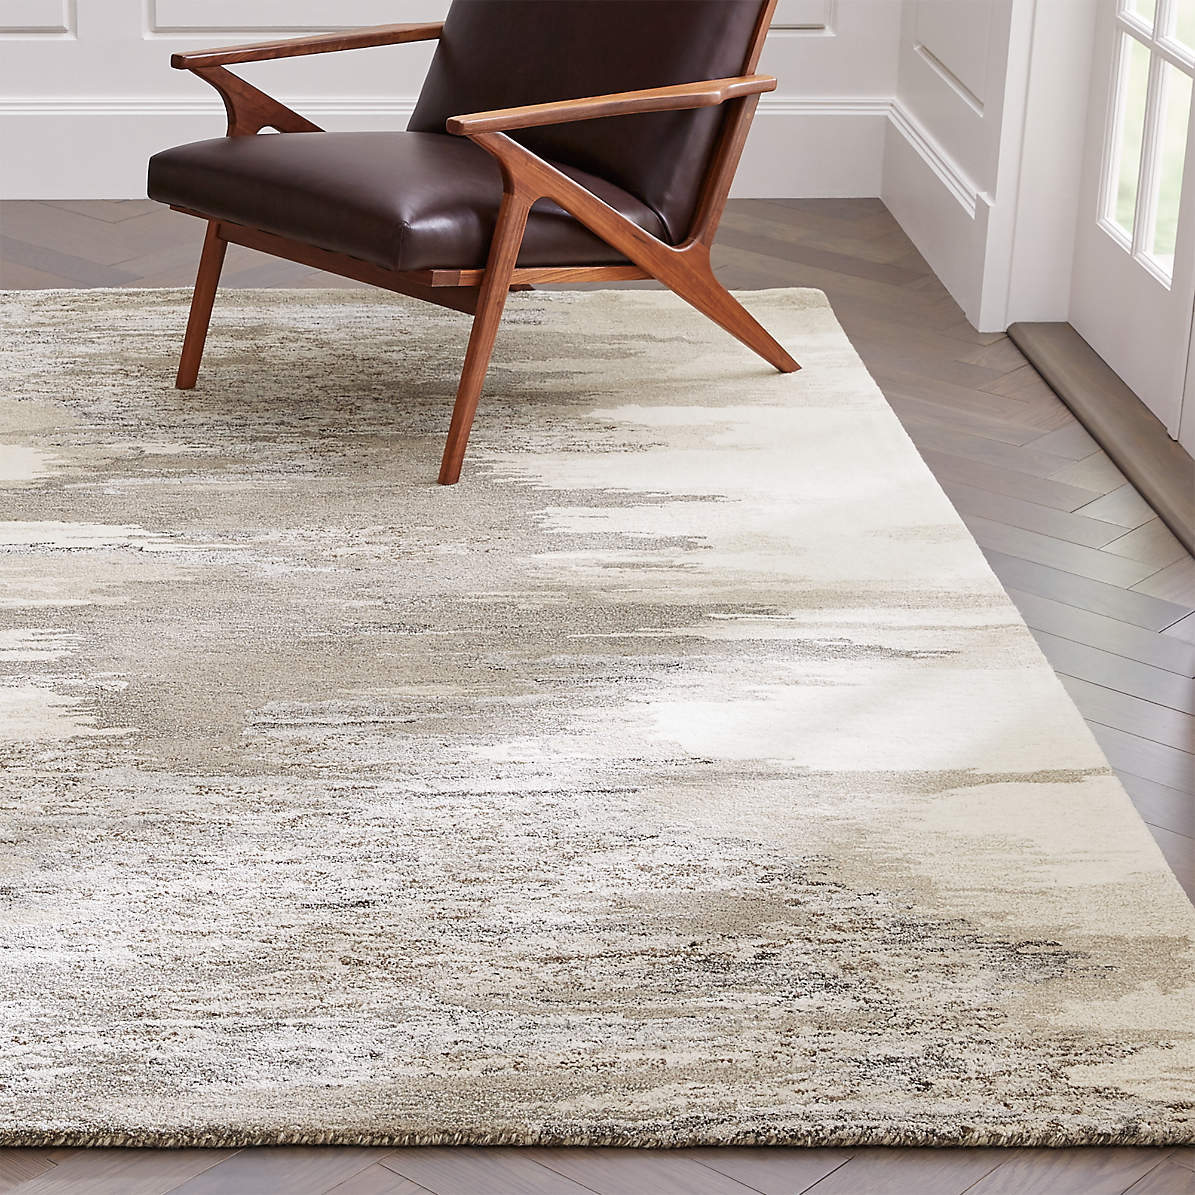 Birch Neutral Wool Blend Abstract Rug, Crate And Barrel Rugs